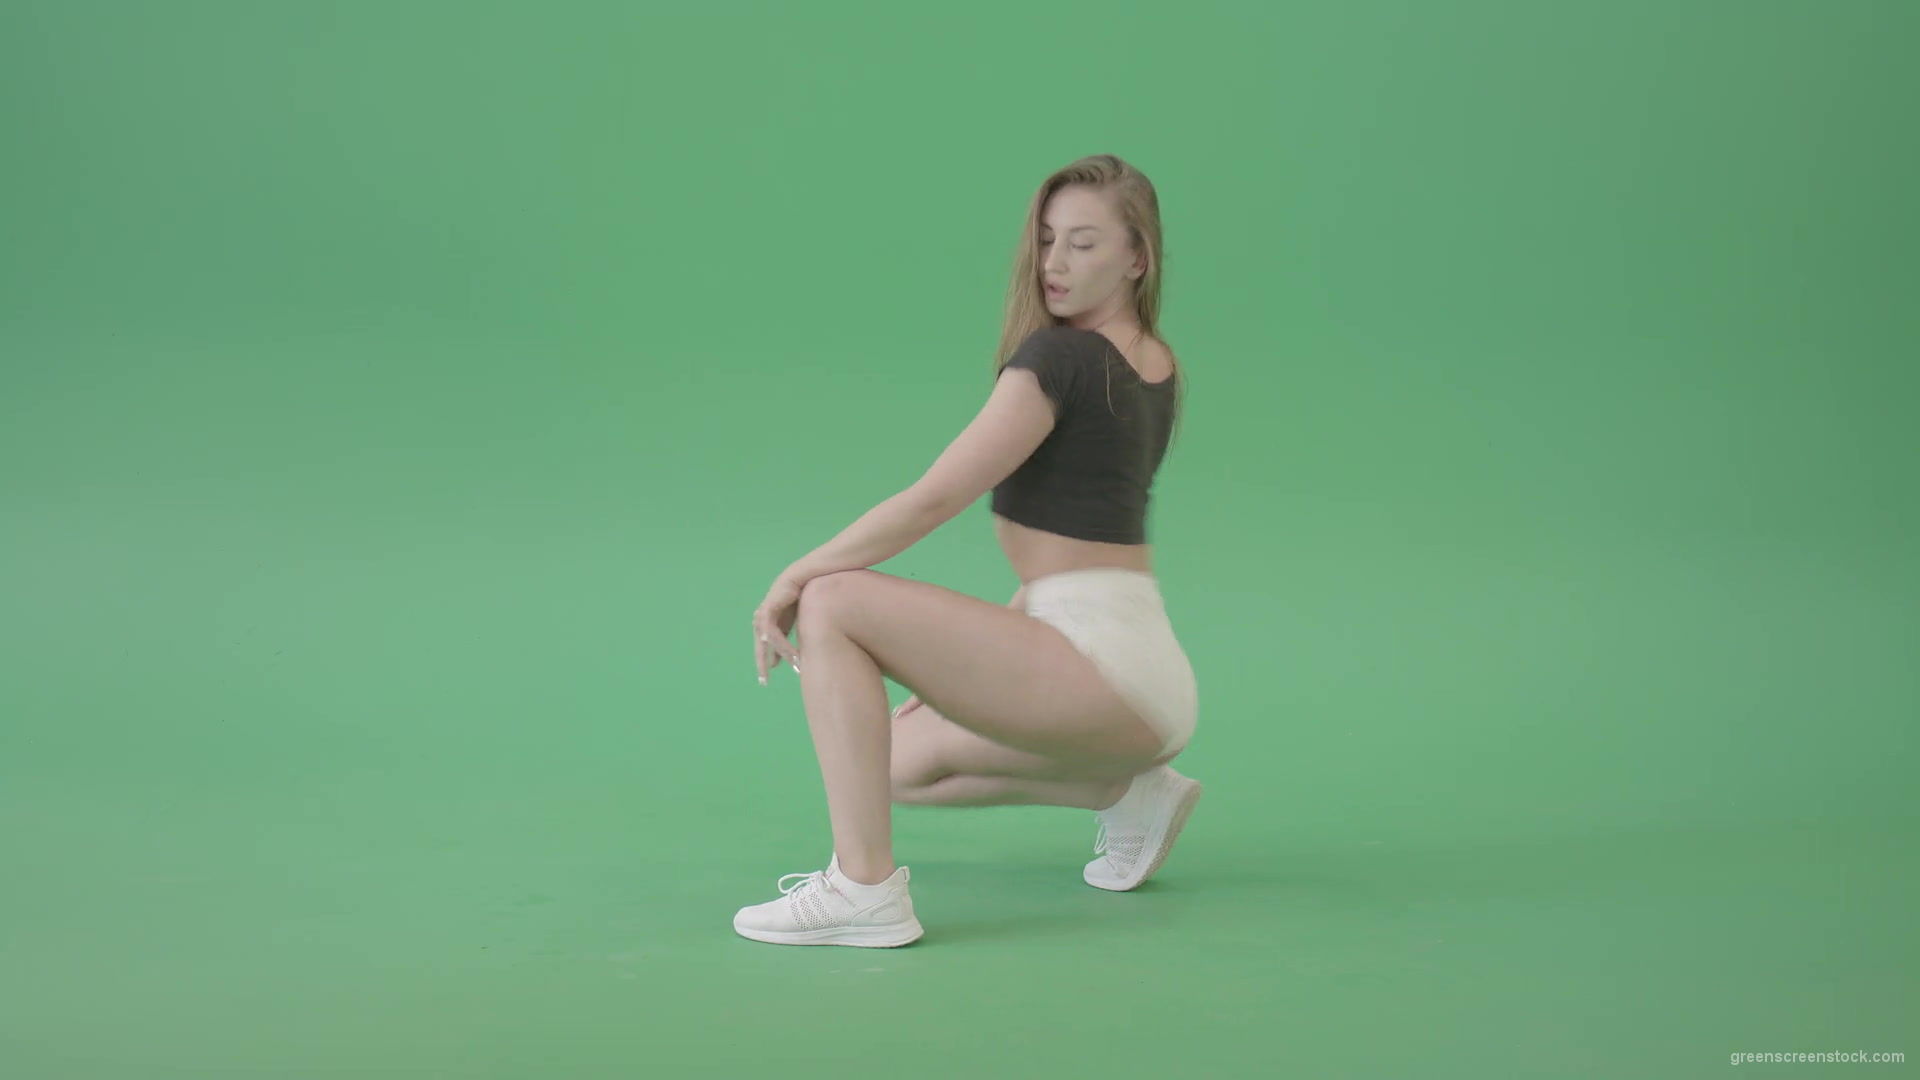 Girl-in-sitting-pose-twerking-shaking-ass-isolated-on-green-screen-4K-Video-Footage-1920_002 Green Screen Stock